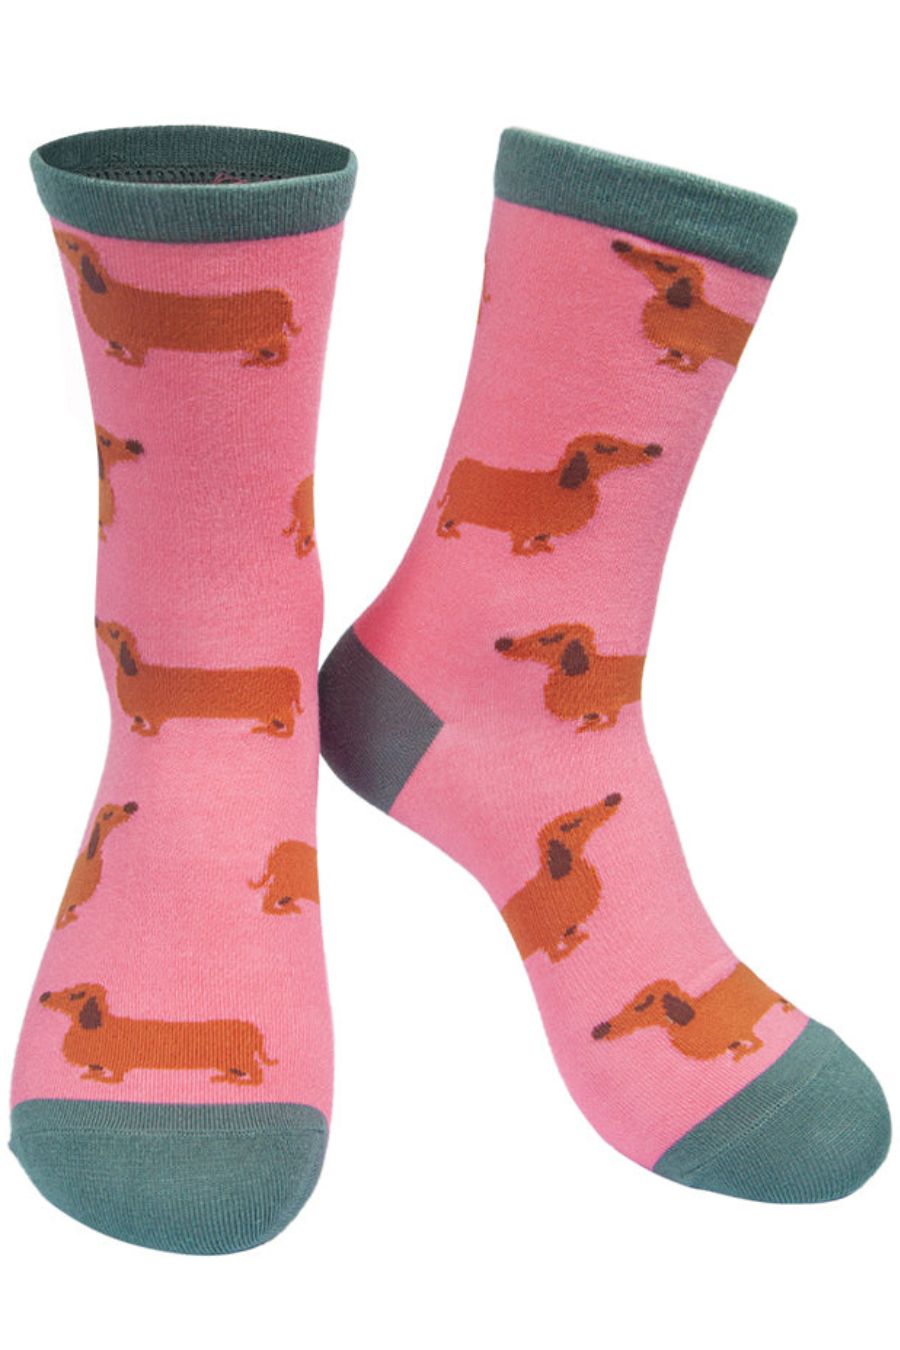 pink and green ankle socks with an all over dachshund print